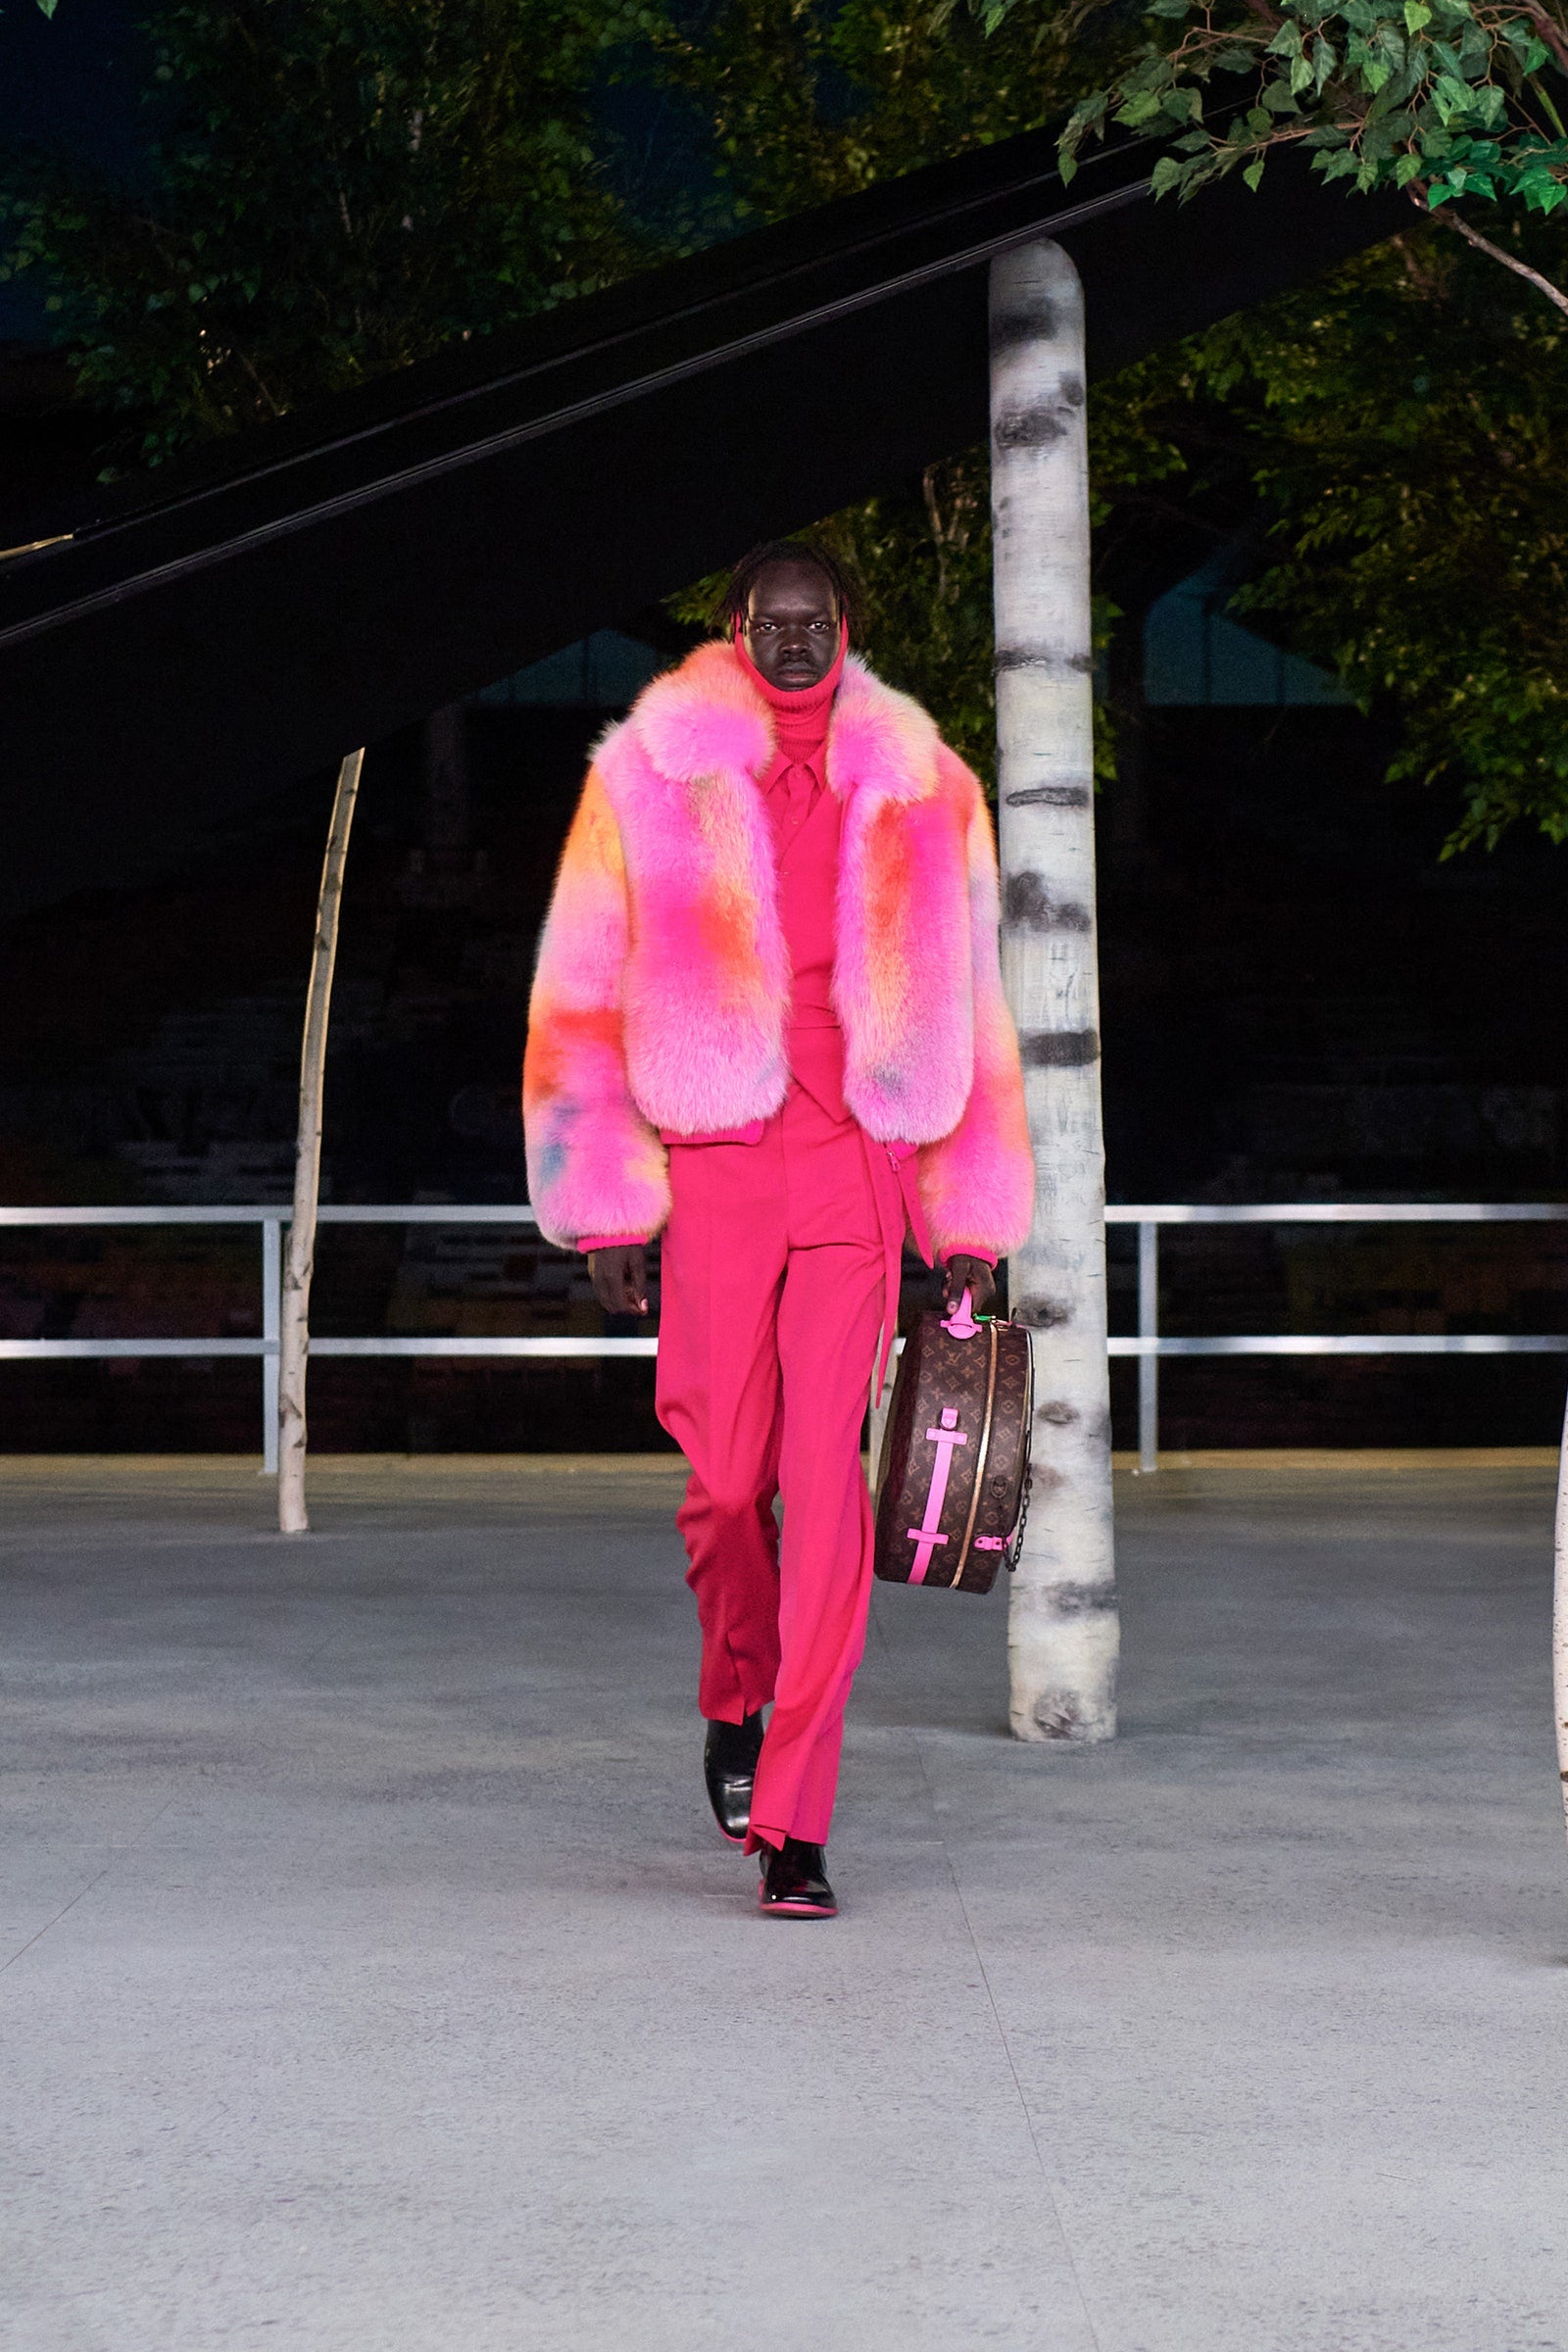 Virgil Abloh's final fashion collection shown in Miami